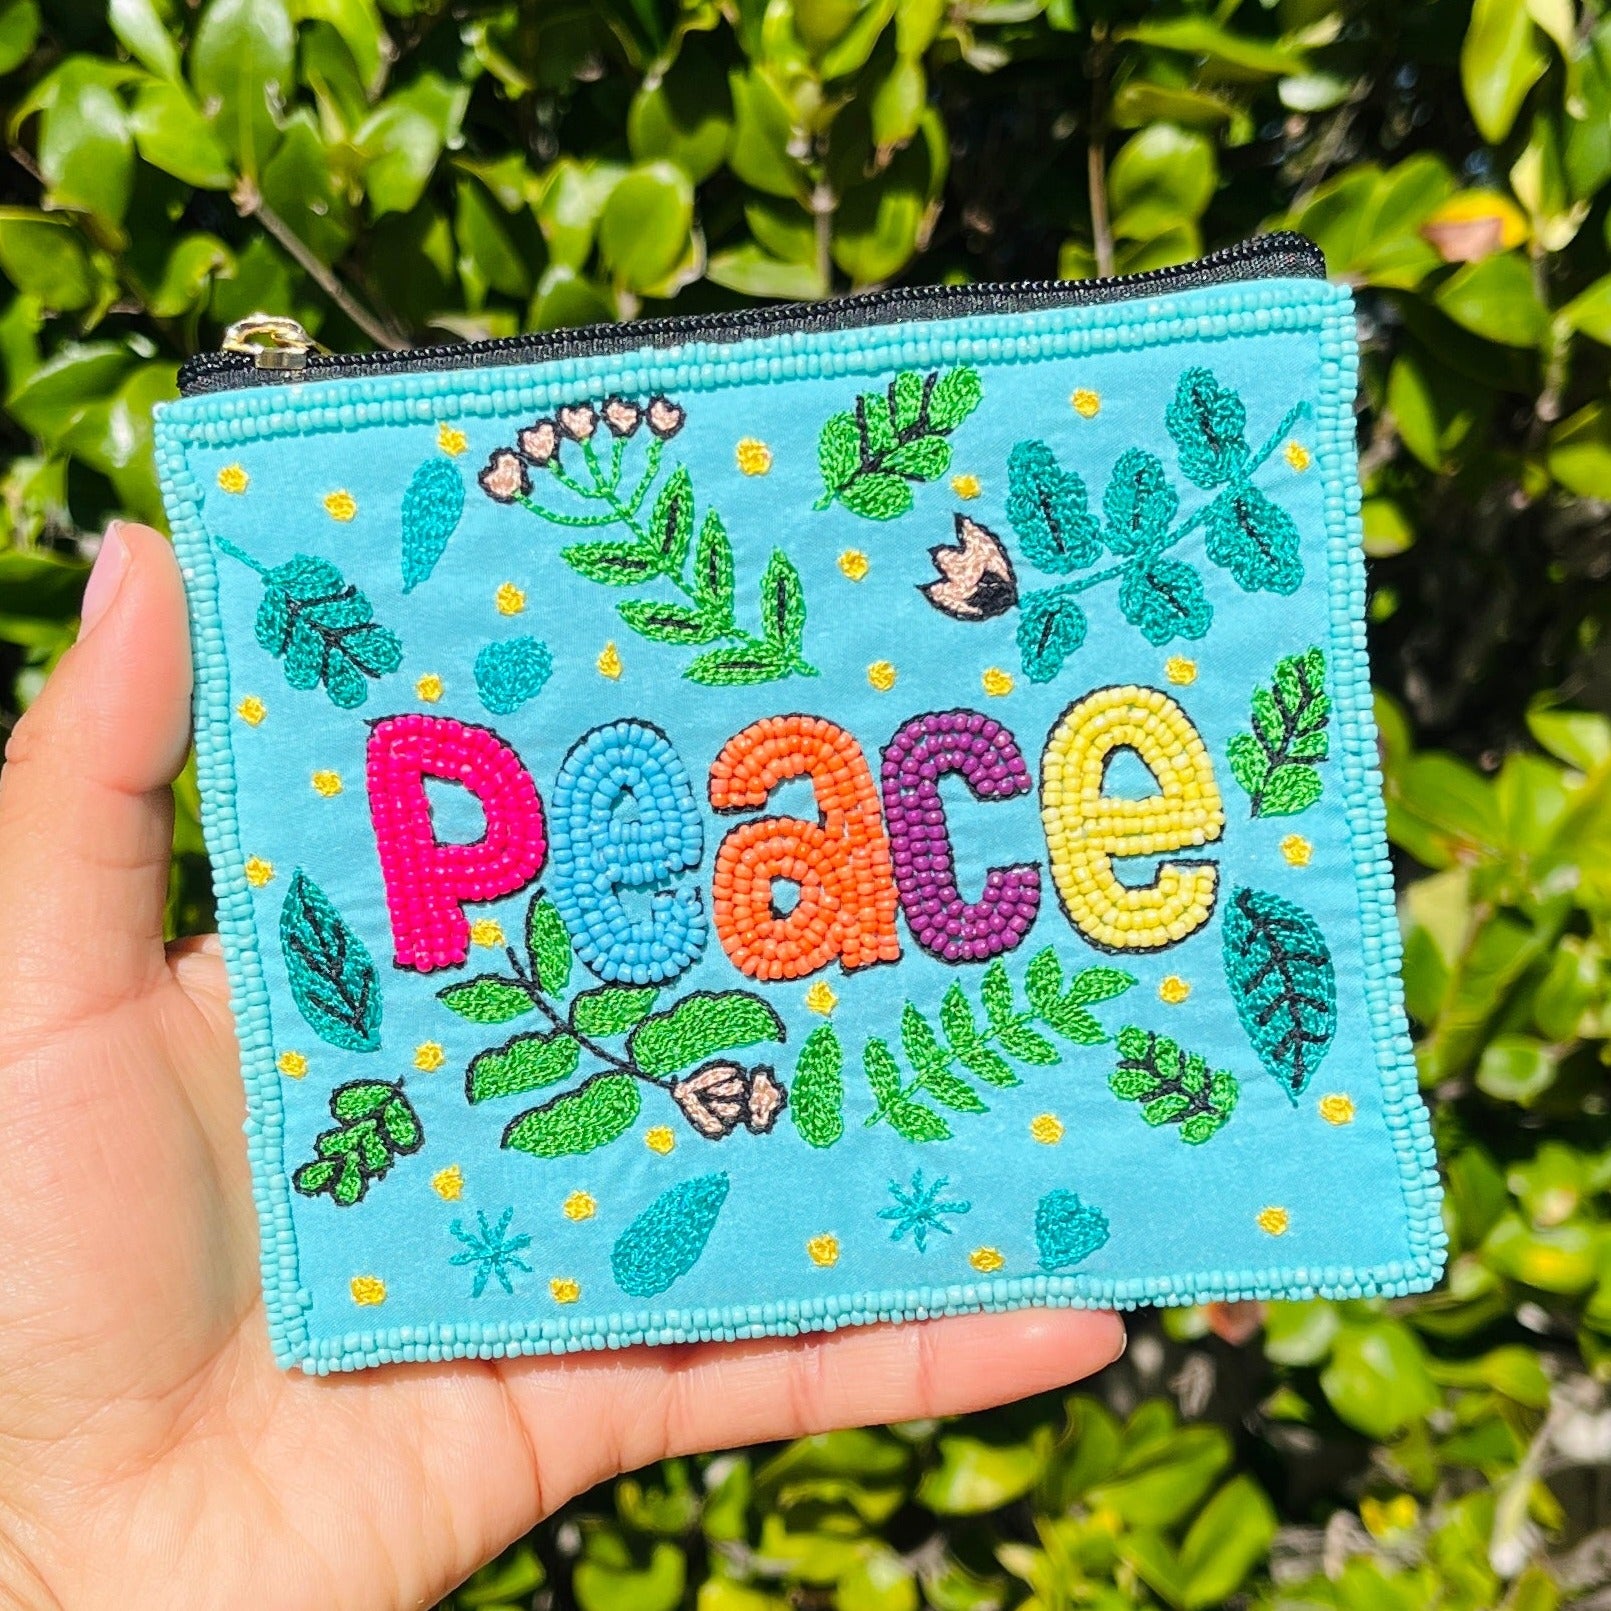 Is Purse Peace Possible?